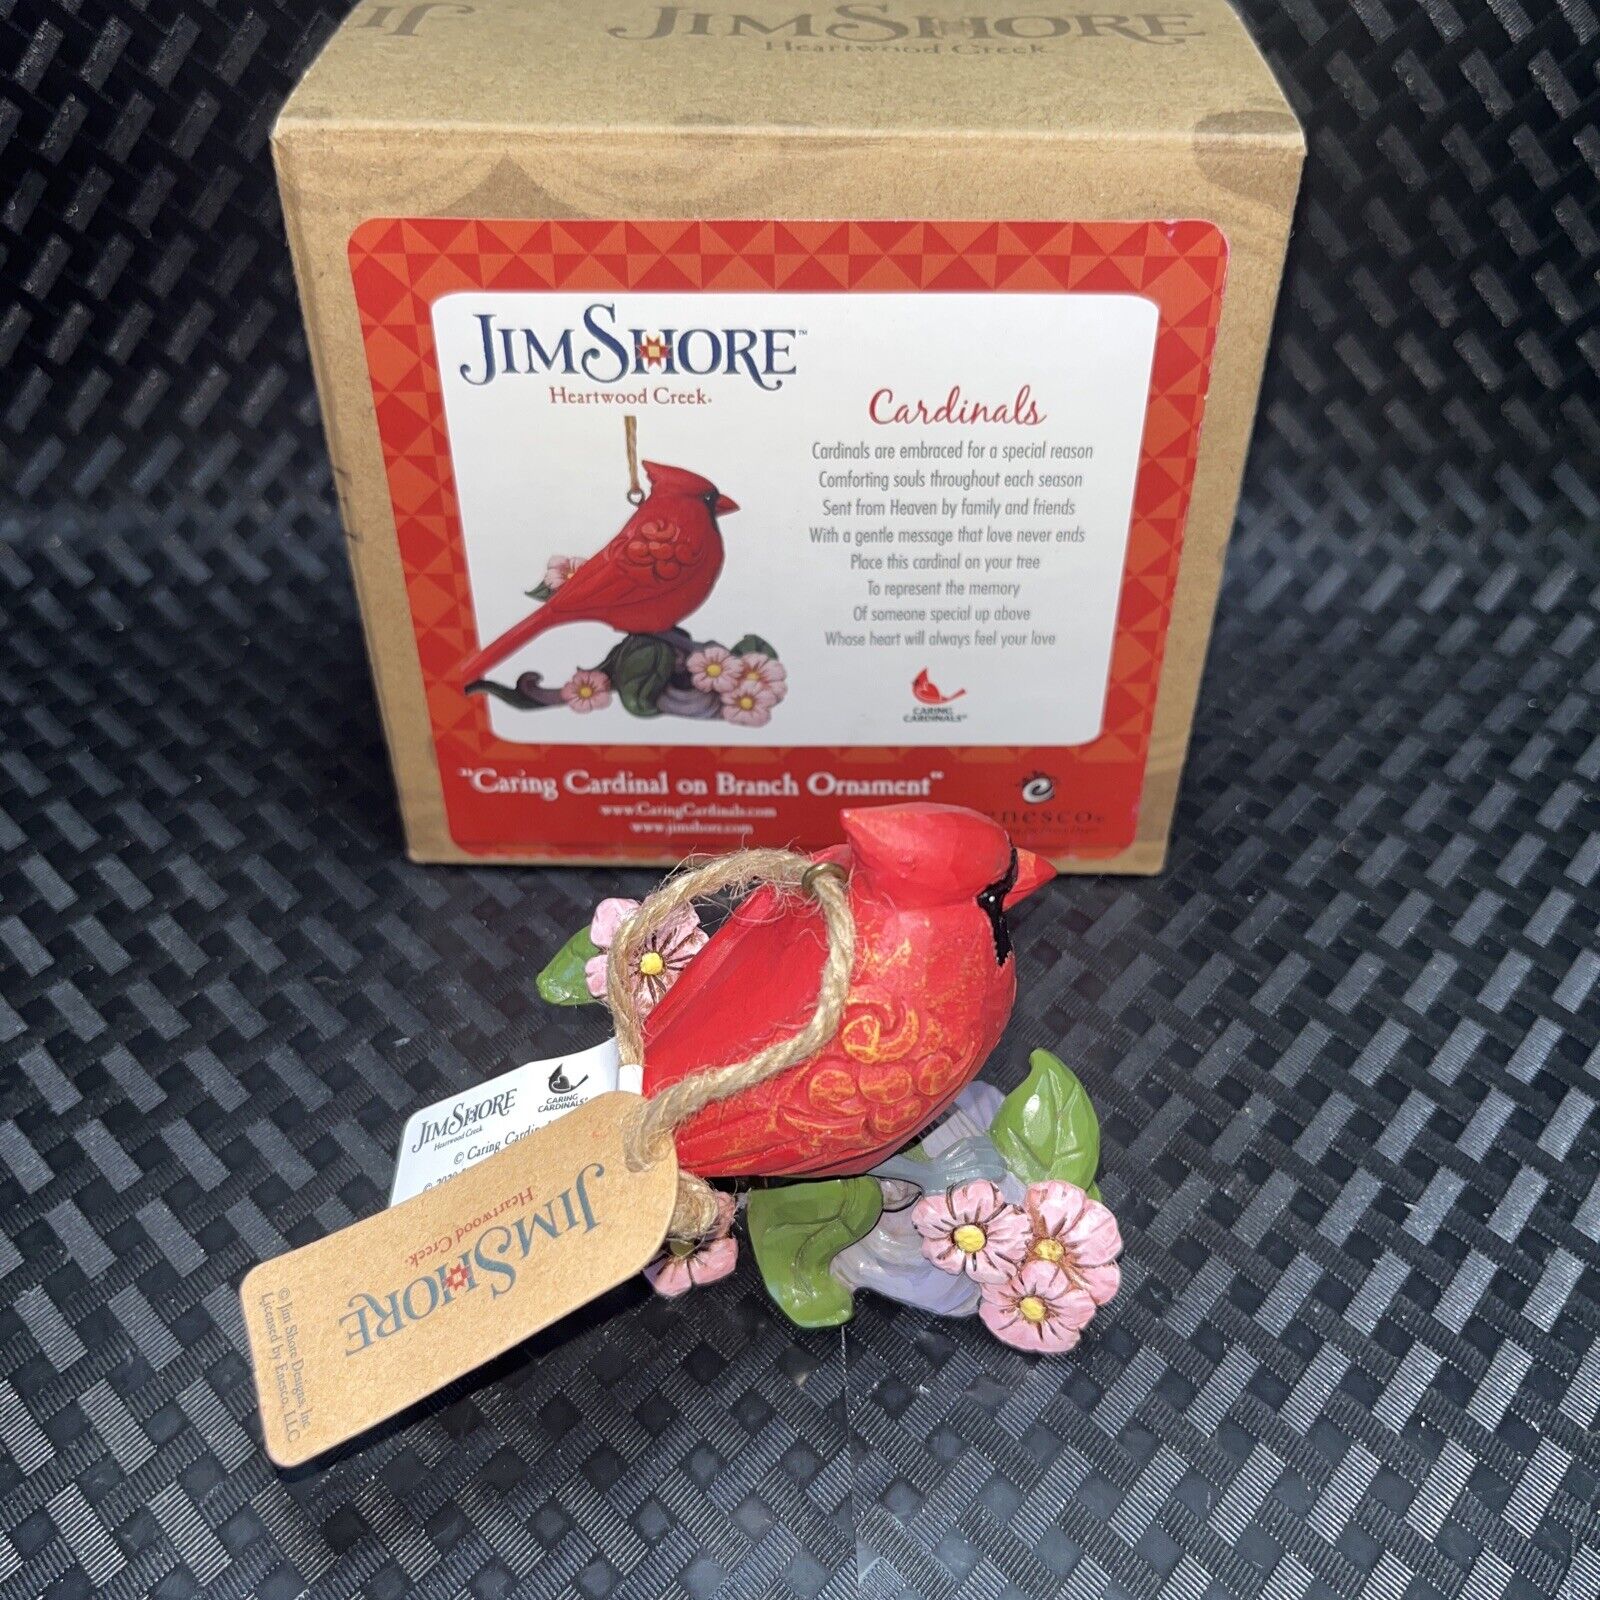 Jim Shore Caring Cardinal on Branch Ornament #6005690 New In Box 